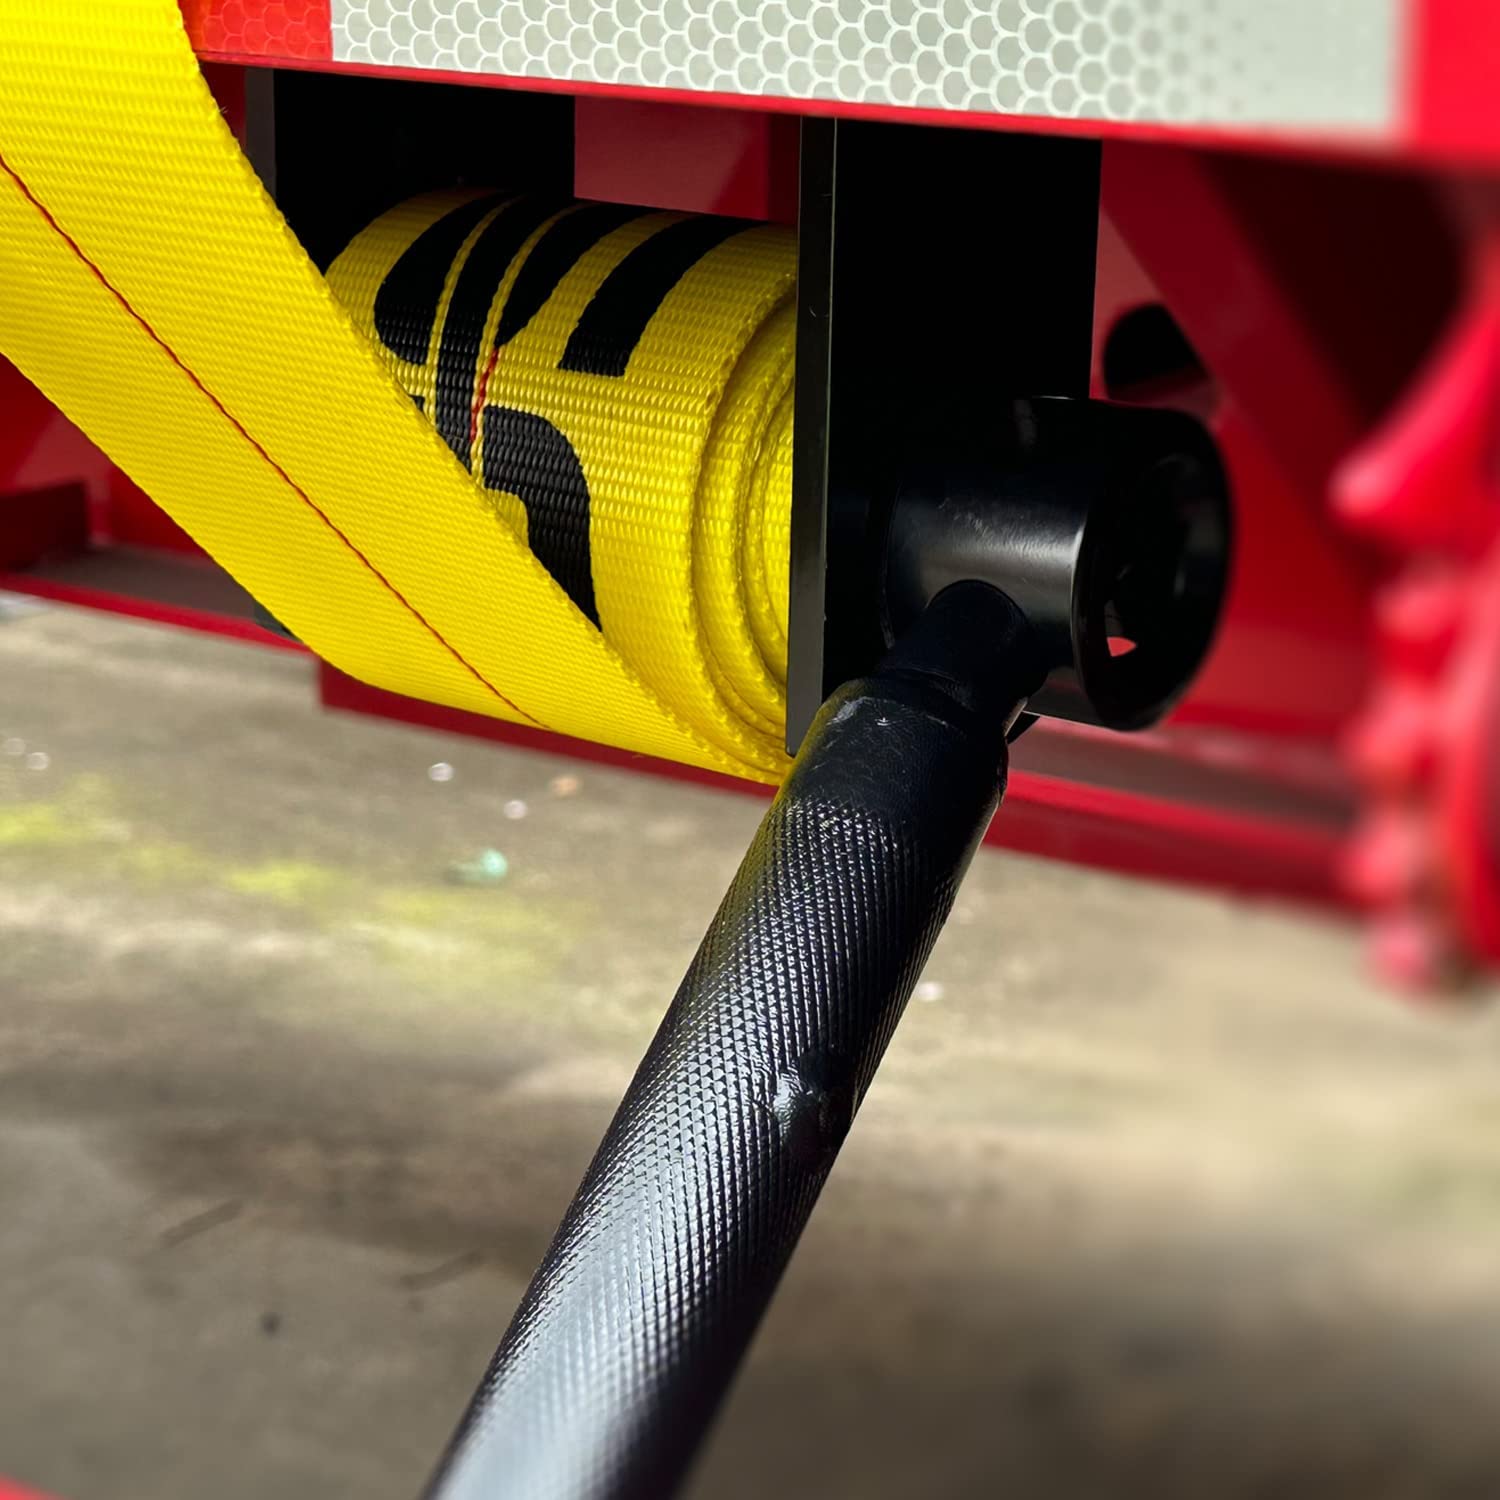 How to strap a load by web winch?